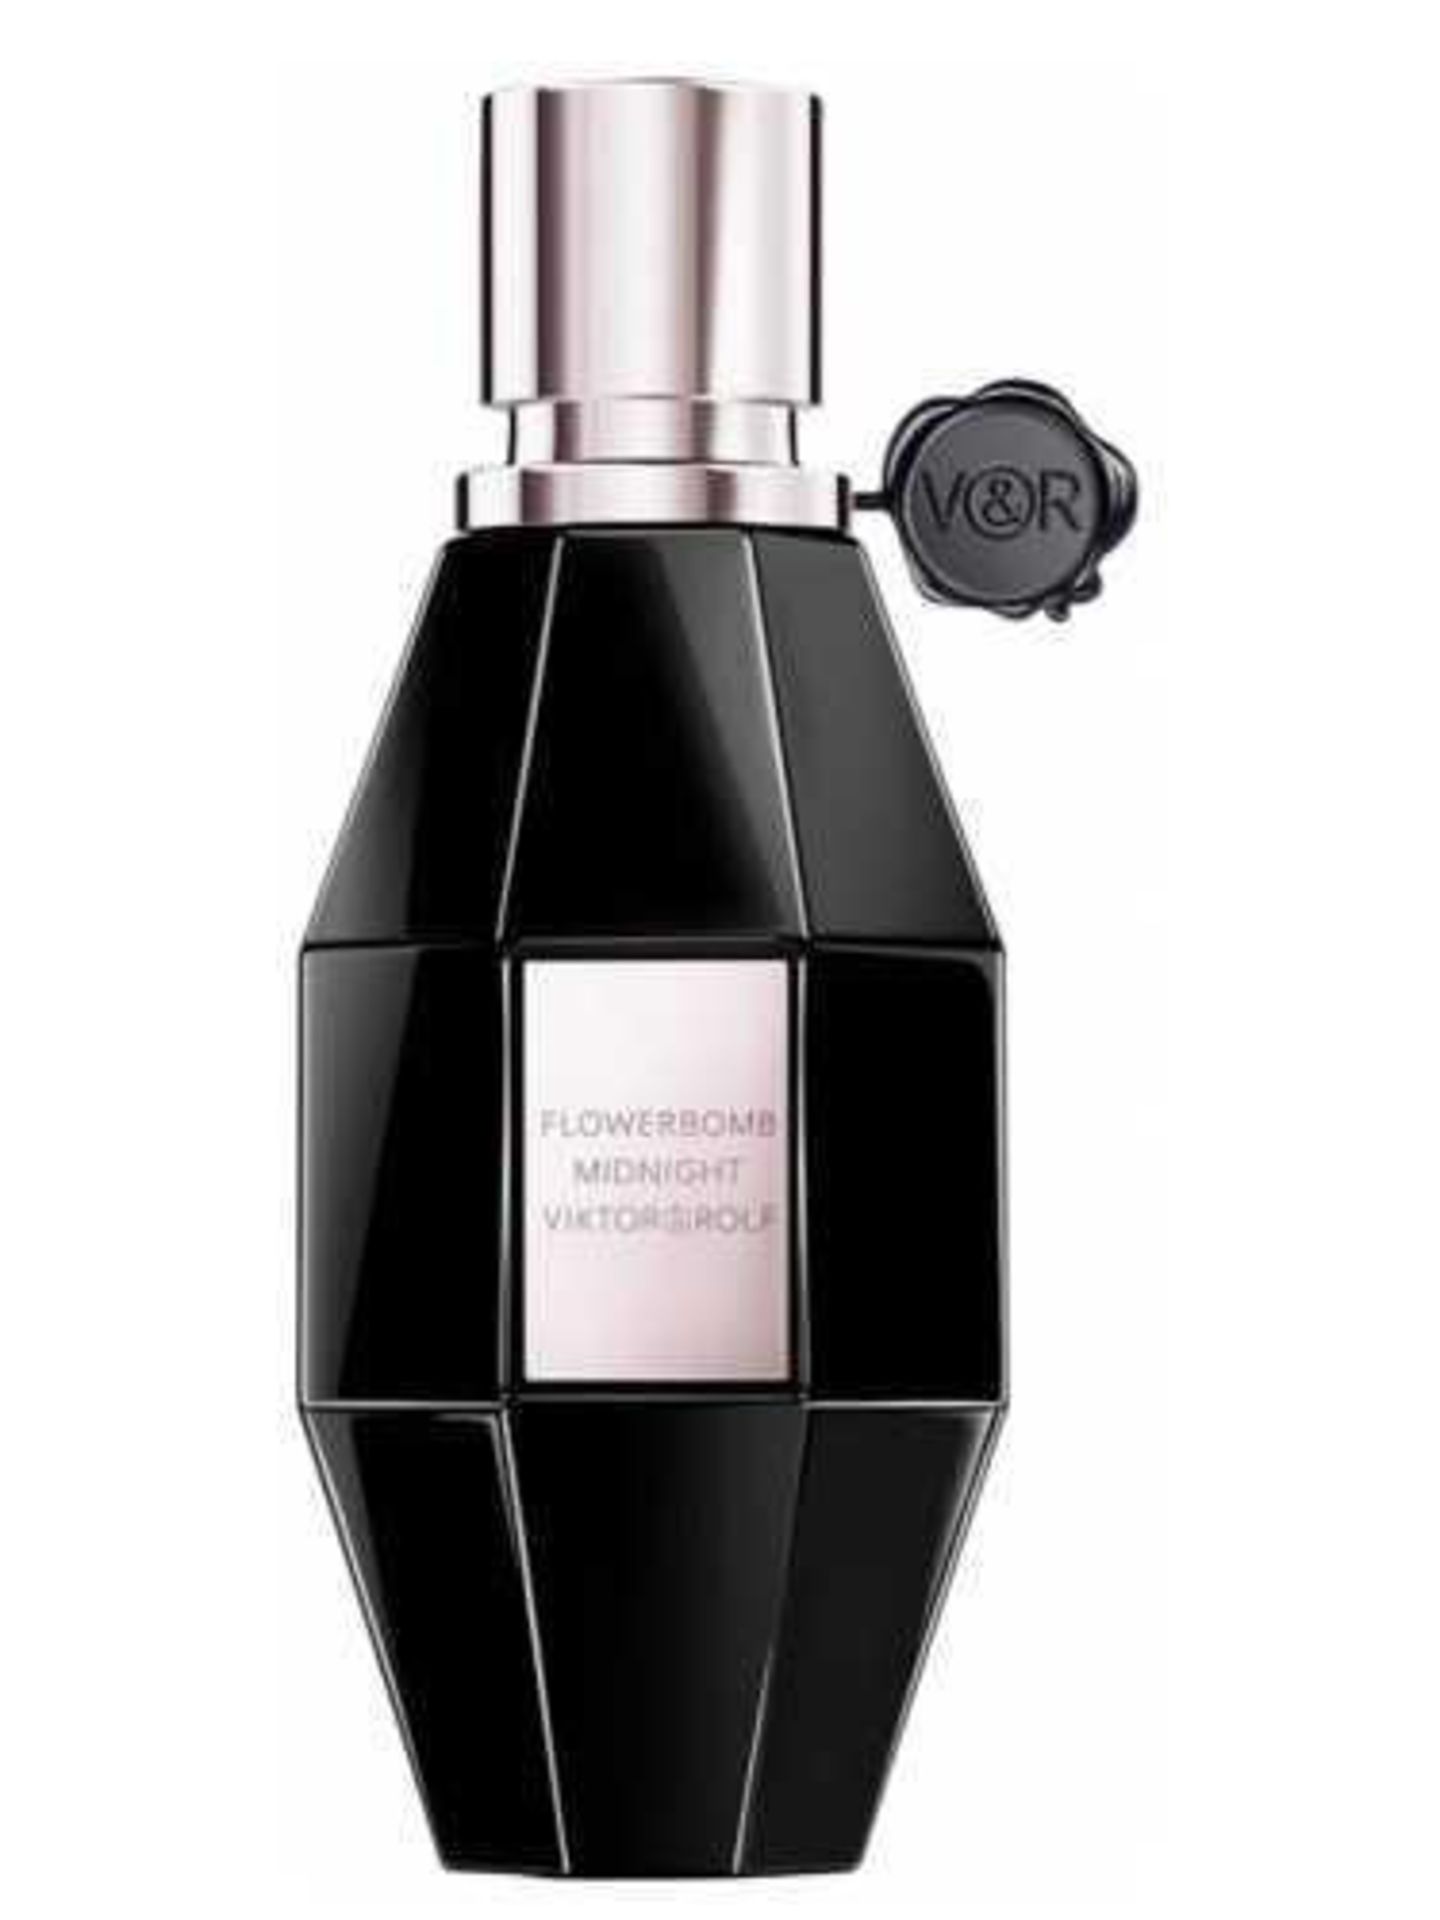 Rip £120 Unboxed 100Ml Bottle Of Viktor And Rolf Flowerbomb Midnight Edp Spray Ex Display